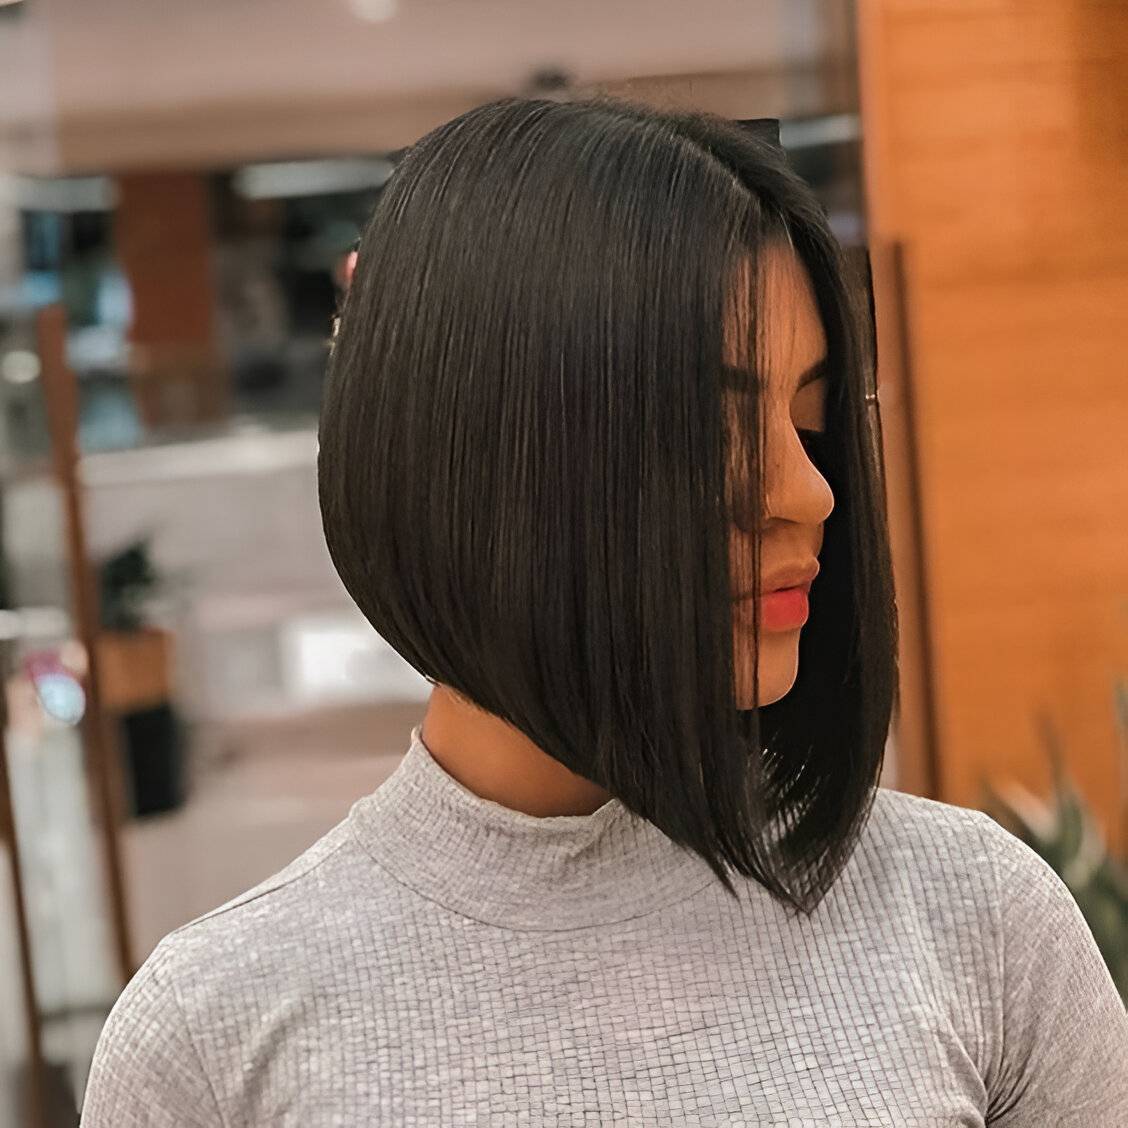 Shine Bright Like A Diamond With These 25 Gorgeous Straight Bob Haircuts - 173